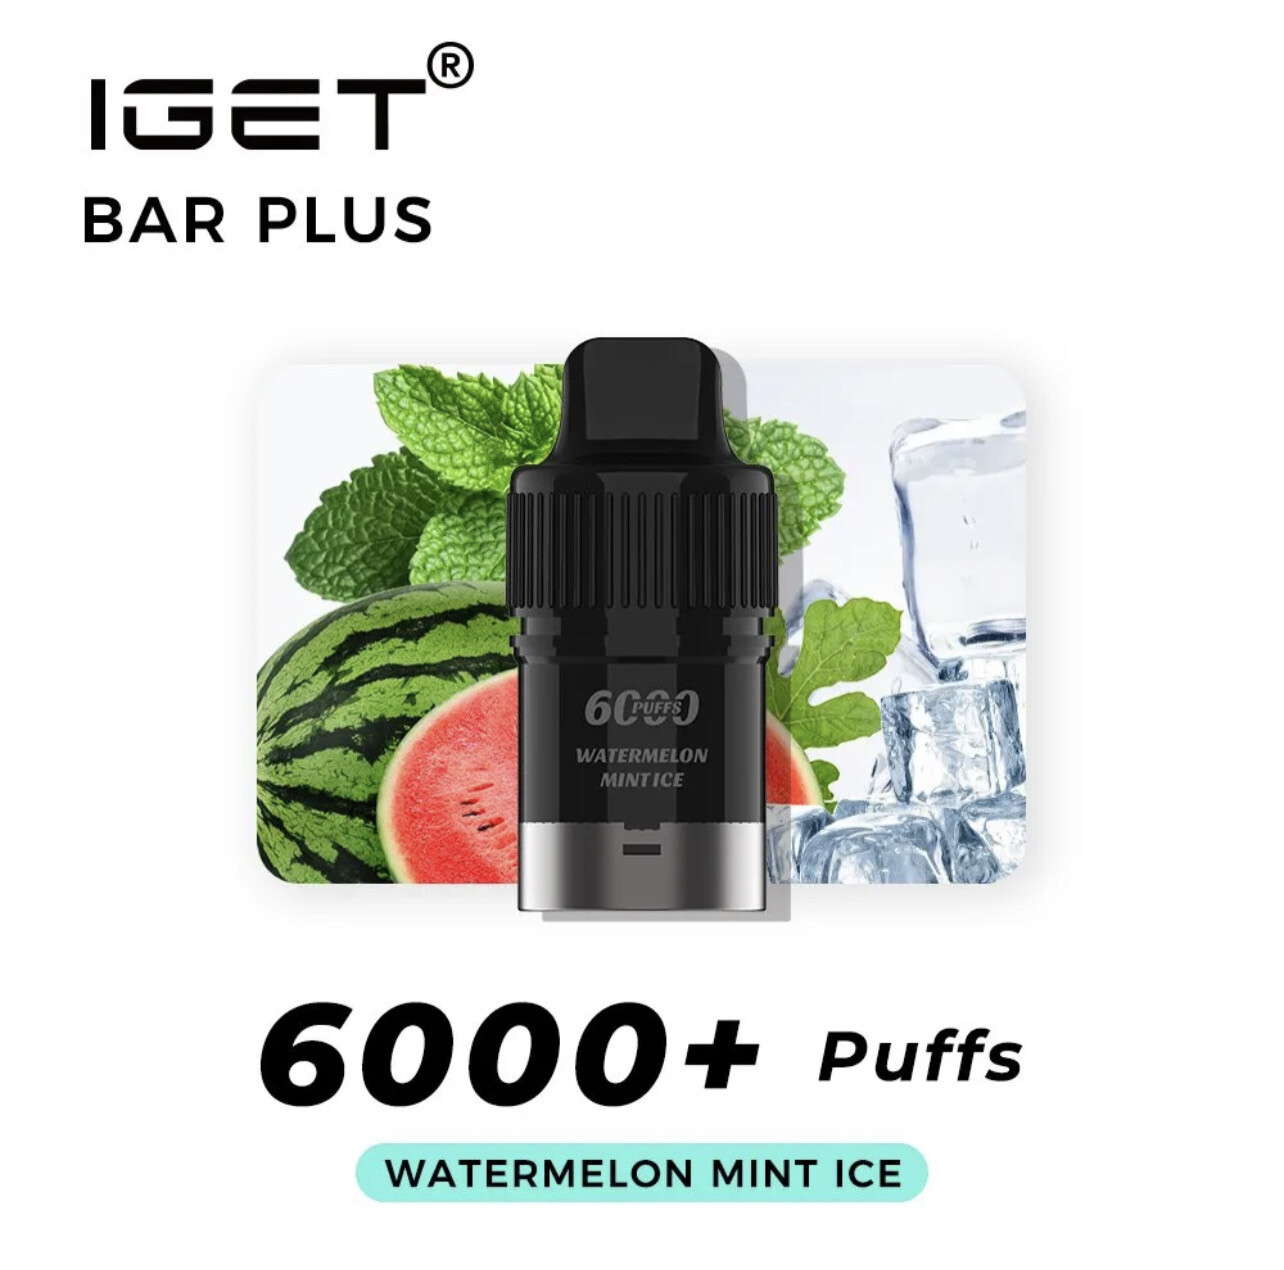 WATERMELON MINT ICE PODS ONLY 6000 PUFFS